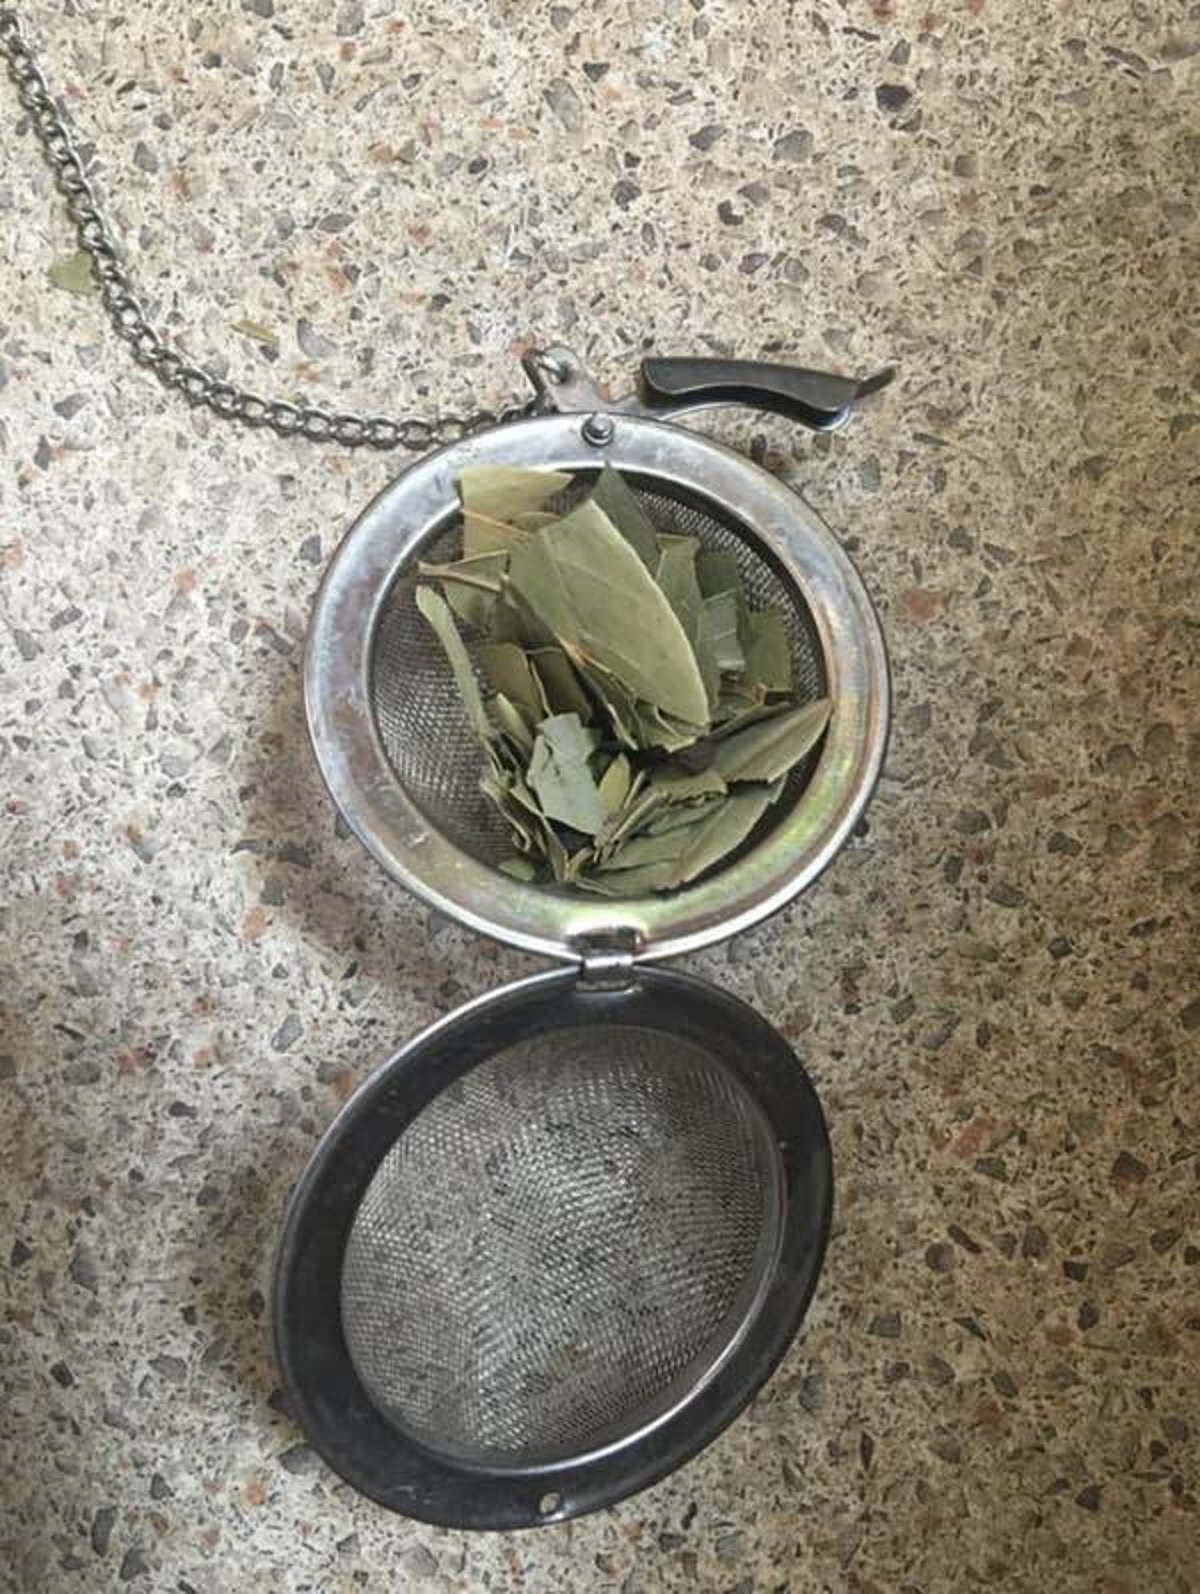 "When making stocks, stews, or sauces, use a tea infuser for your herbs. "It's super useful for getting the most out of the broken bits of bay leaf at the bottom of the bag.""